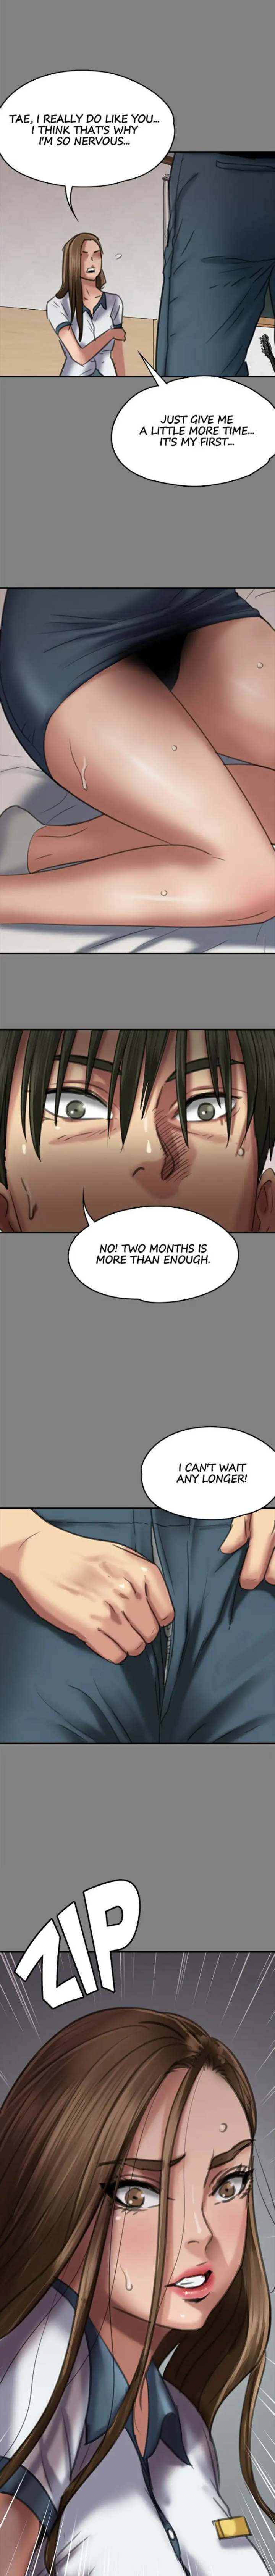 Panel Image 1 for chapter 65 of manhwa Queen Bee on read.oppai.stream